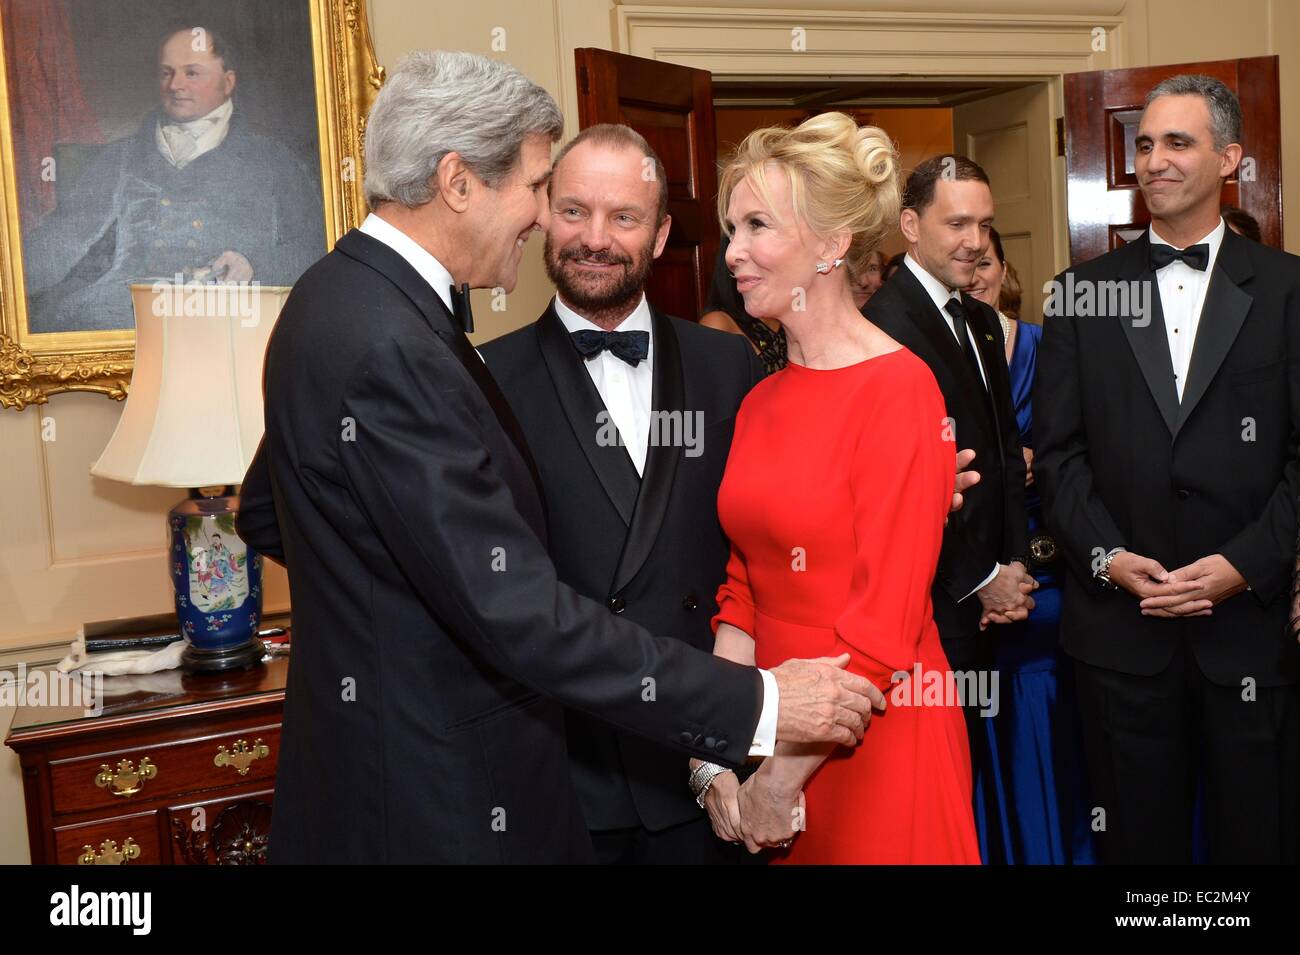 US Secretary of State John Kerry greets musician Sting and his wife, Trudie Styler, before a dinner for the 2014 Kennedy Center Honorees at the Department of State December 6, 2014 in Washington, D.C Stock Photo